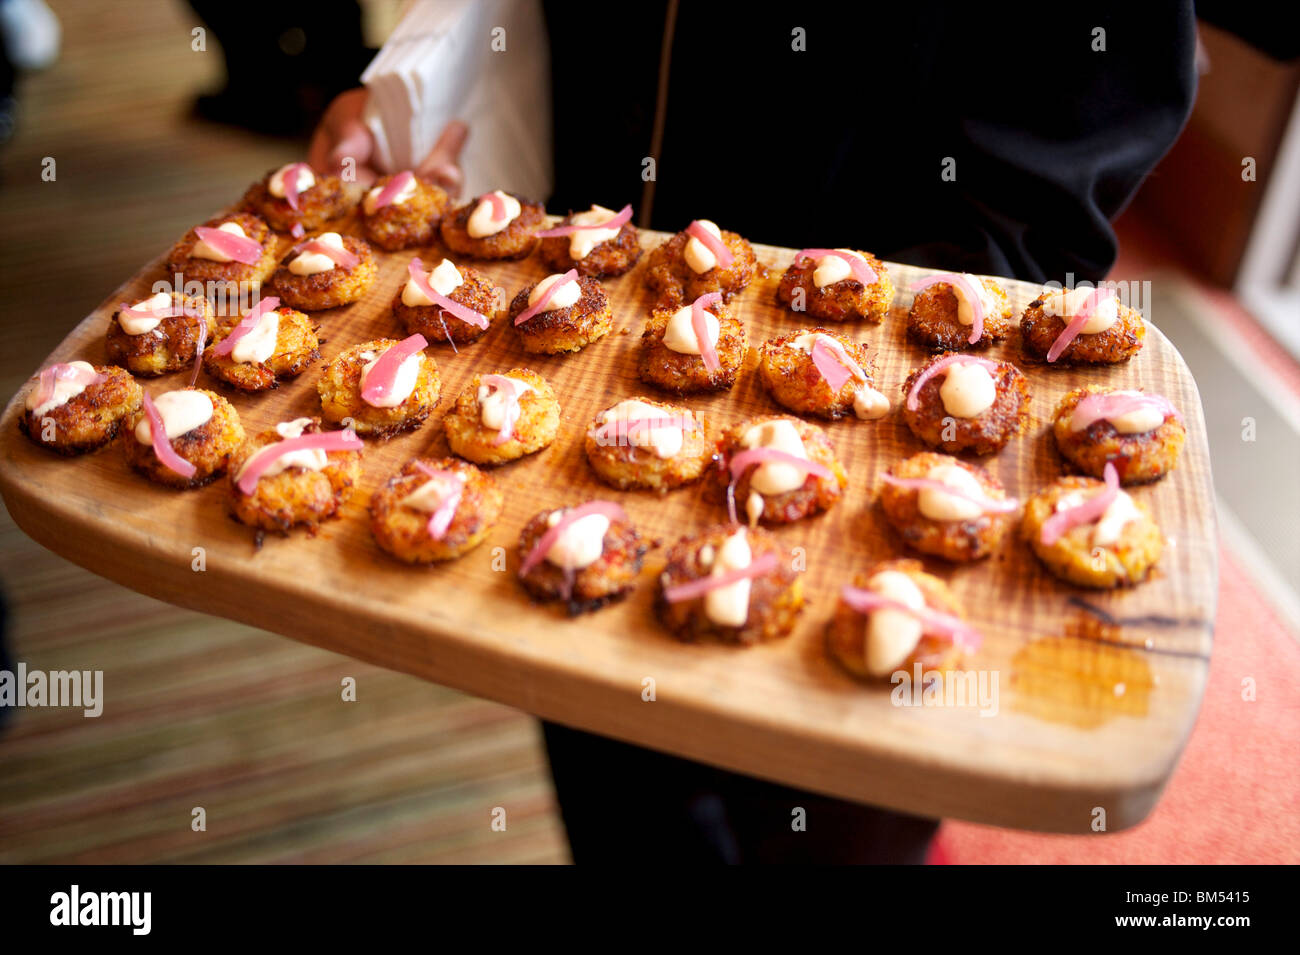 A waiter with a plate of hors d'oeuvres and appetizers. The Four Season's Resort. Whistler BC, Canada Stock Photo